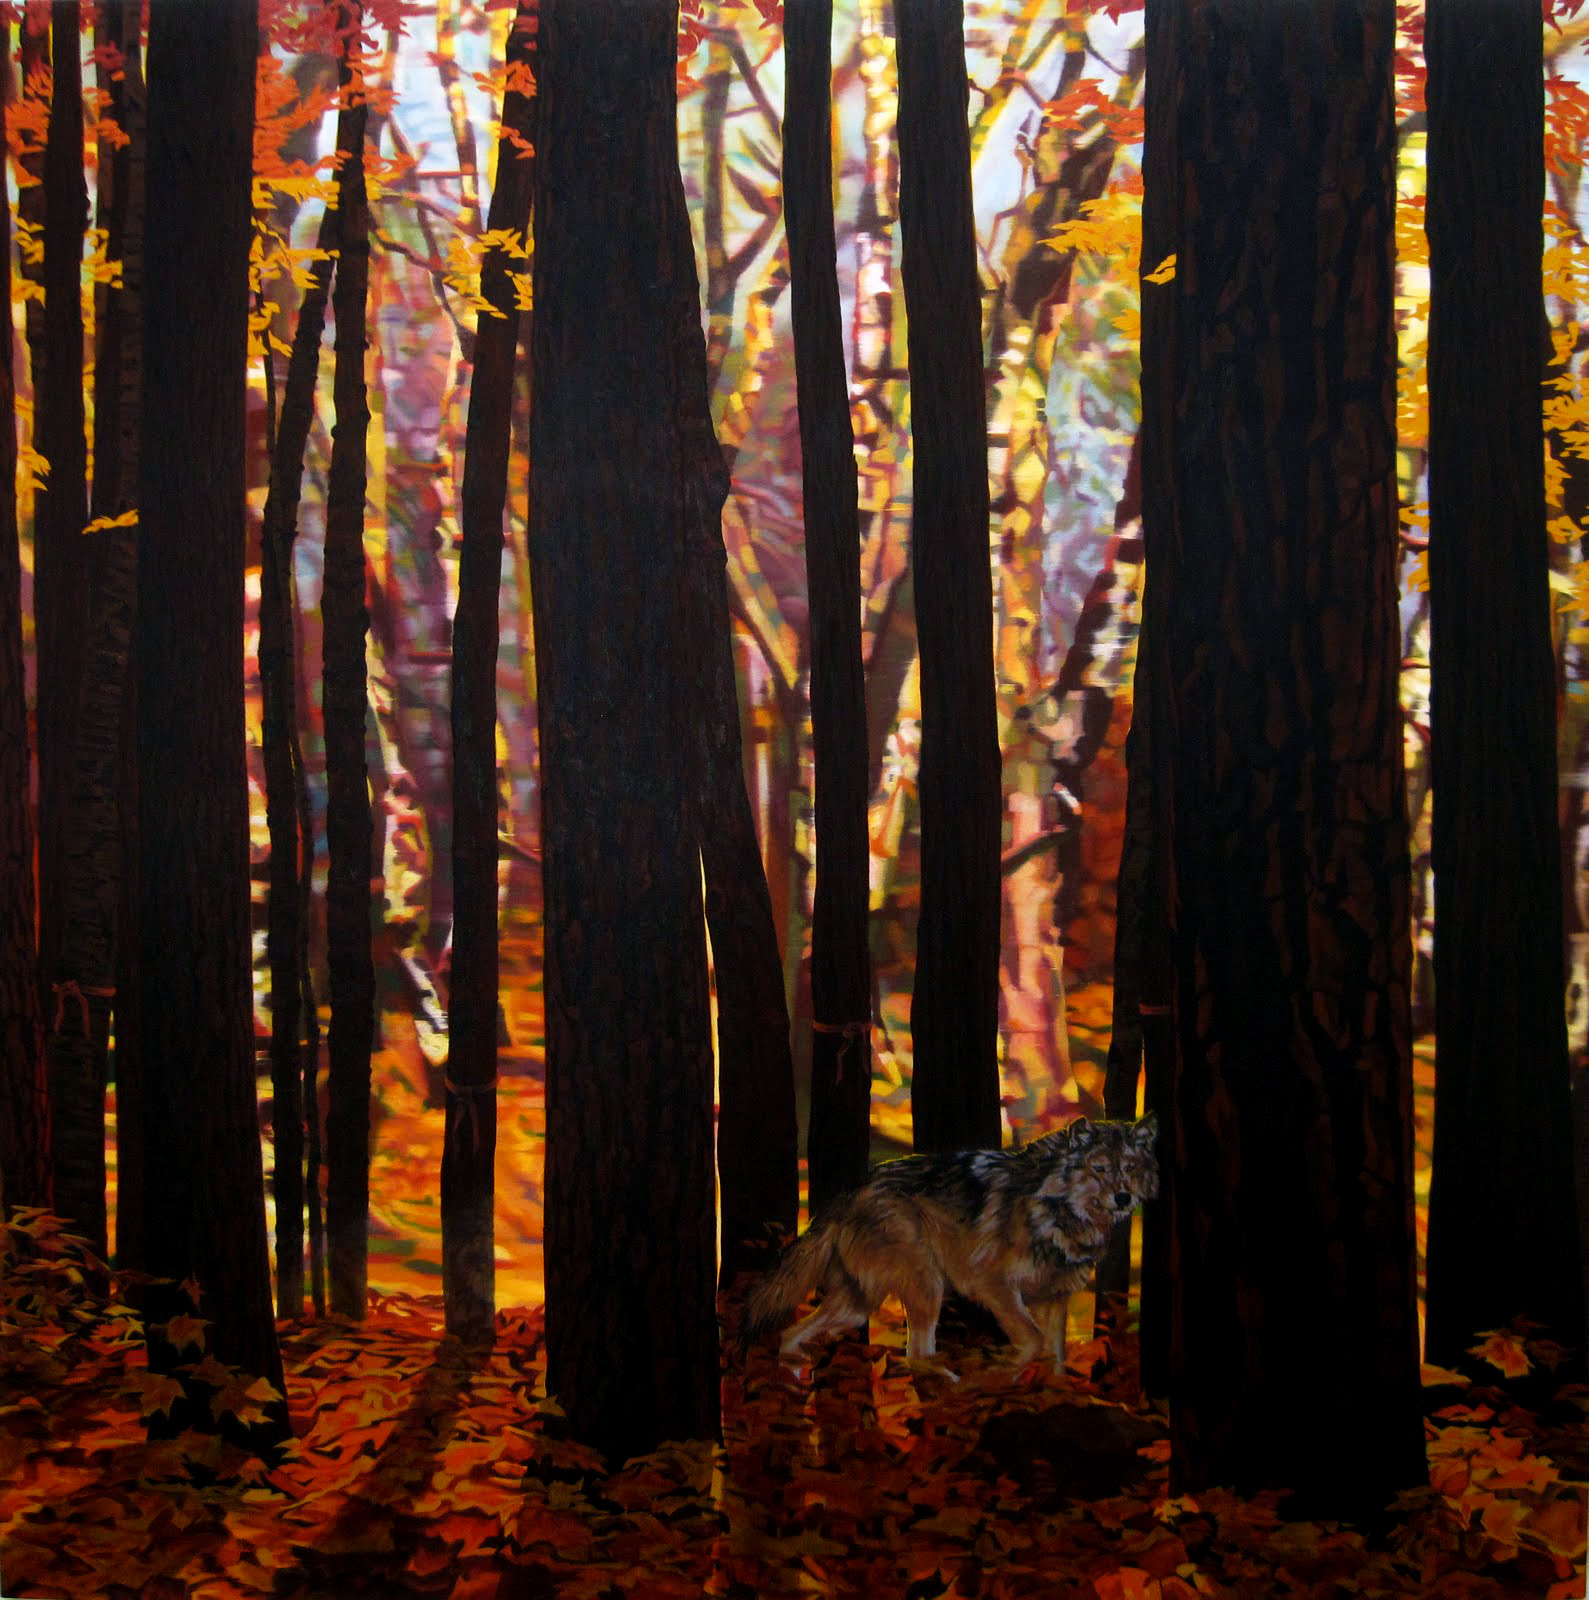  Private Commission  Oil on canvas  96 x 96 inches 